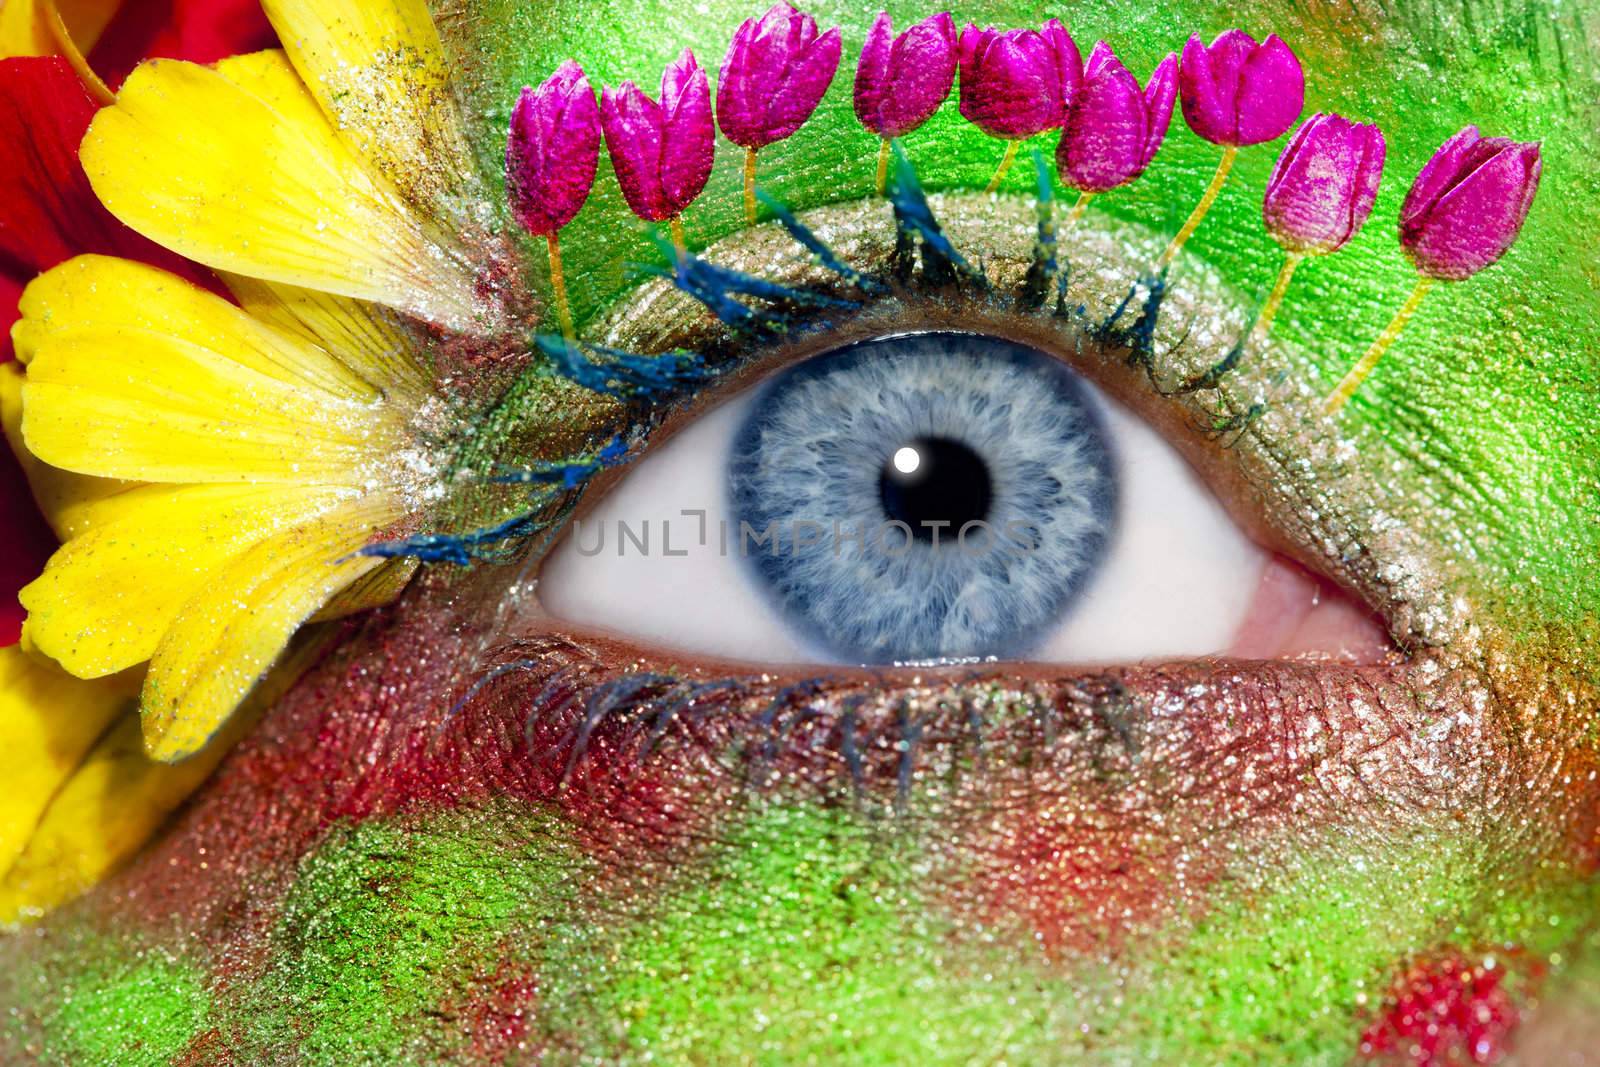 blue woman eye makeup inspired in spring with flowers meadow and yellow petals